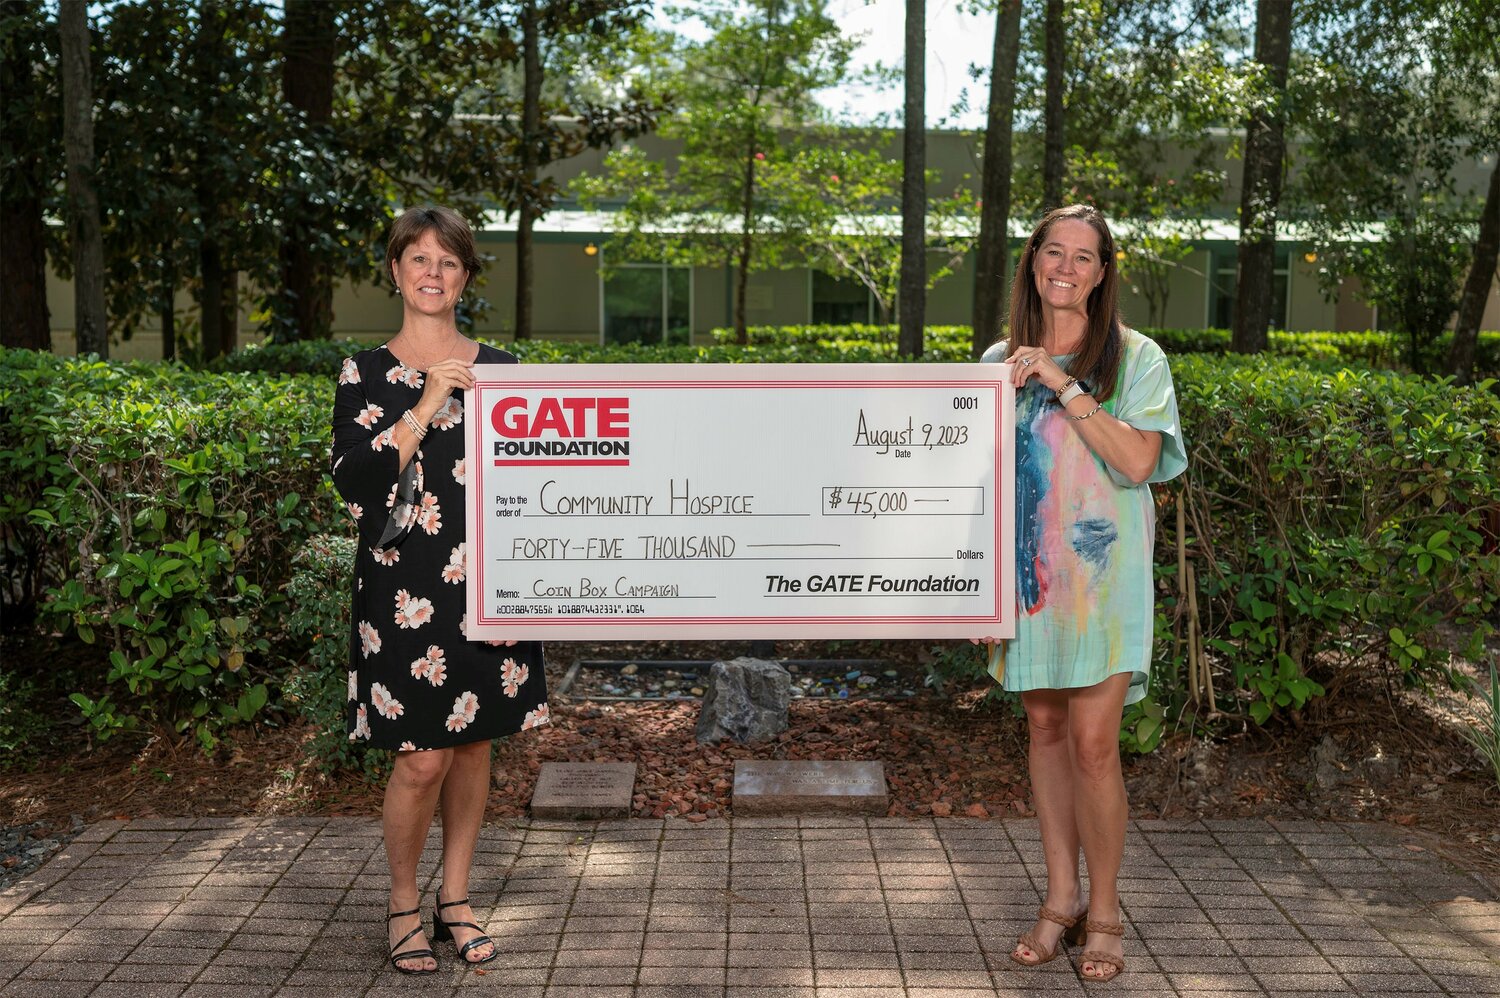 Pictured from left are Kathy Brady, executive director of the GATE Foundation, and Annie Tuttle, executive director of The Foundation of Community Hospice & Palliative Care.